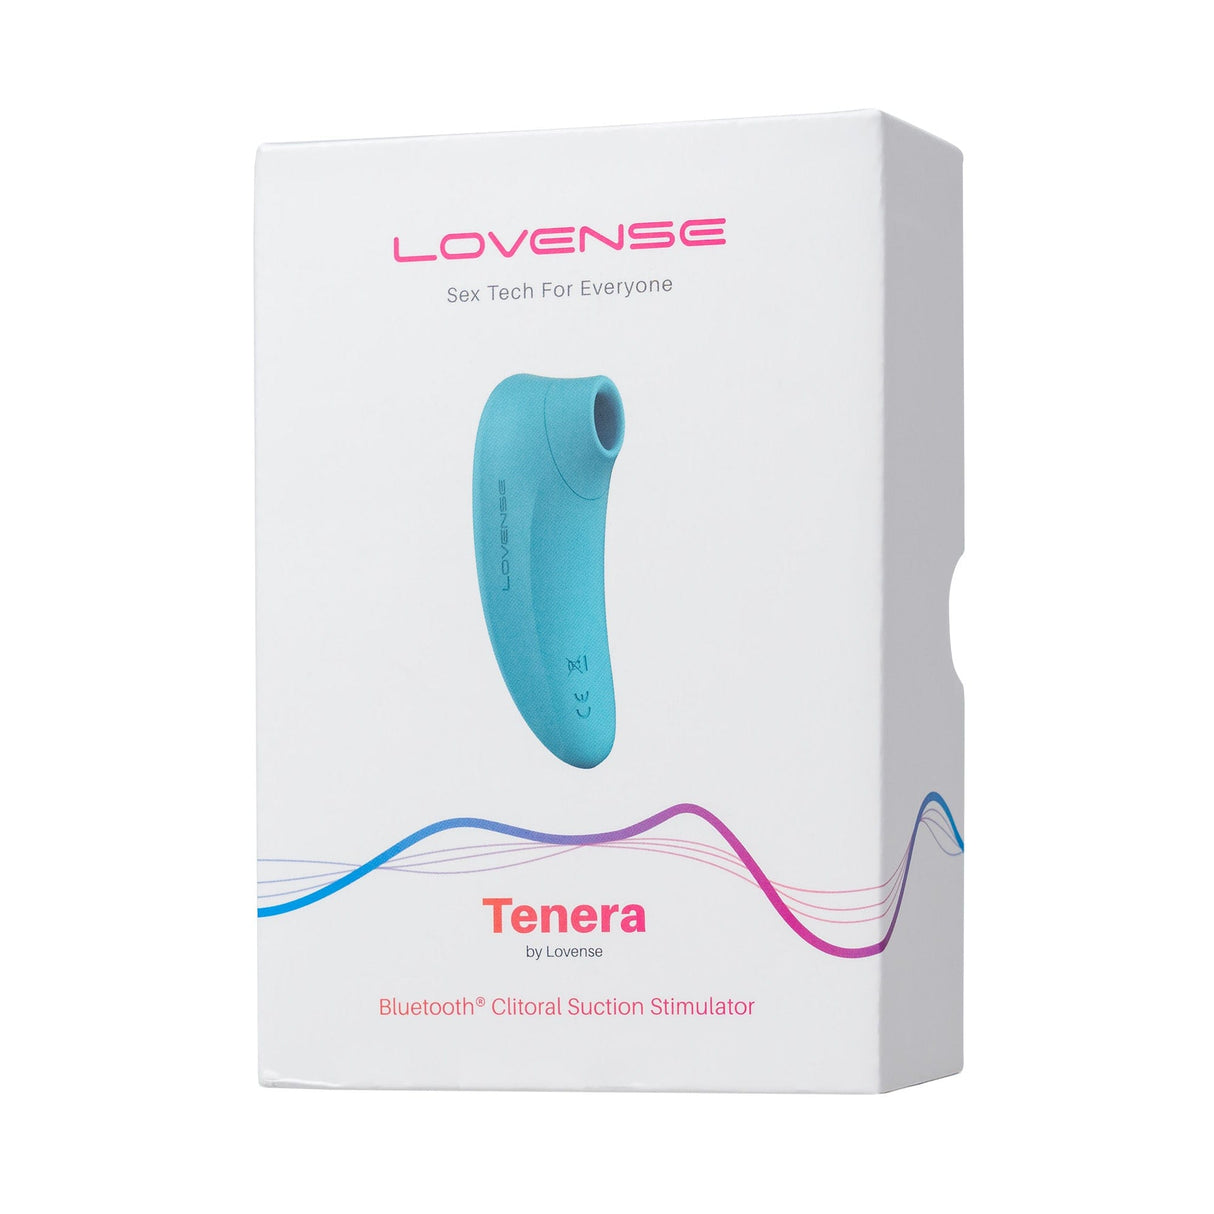 Lovense - Tenera App-Controlled Clitoral Air Stimulator Vibrator (Teal)    Clit Massager (Vibration) Rechargeable